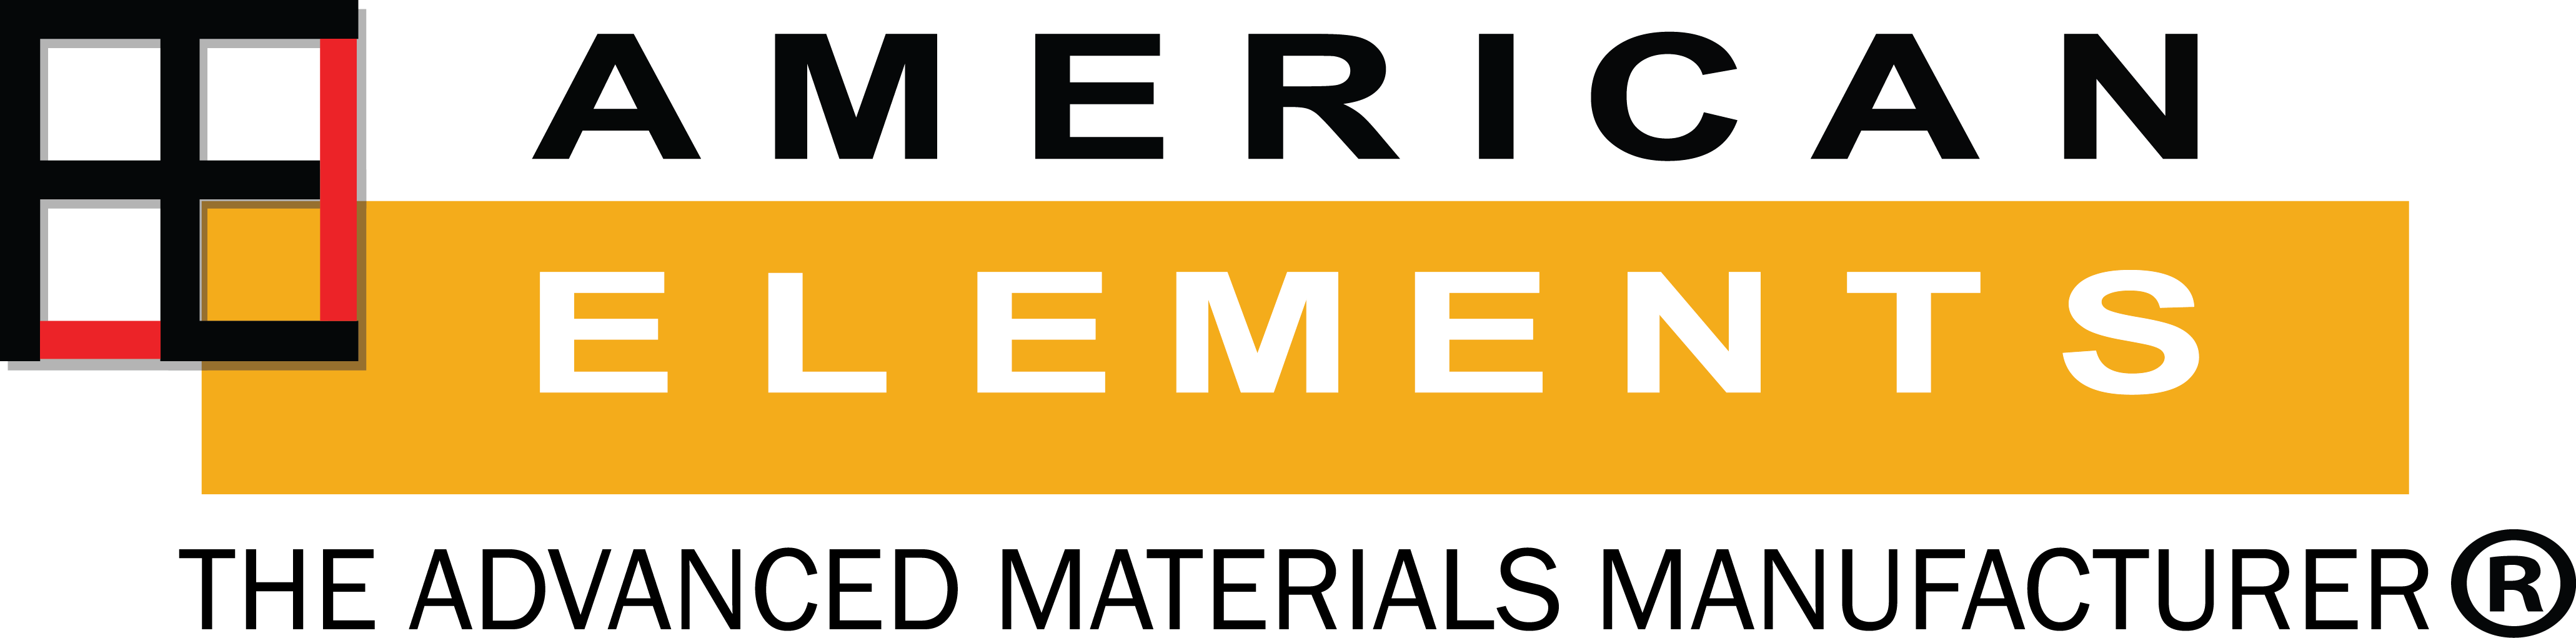 American Elements, global manufacturer of high purity metals, substrates, laser crystals, advanced materials for semiconductors, optoelectronics, & LEDs